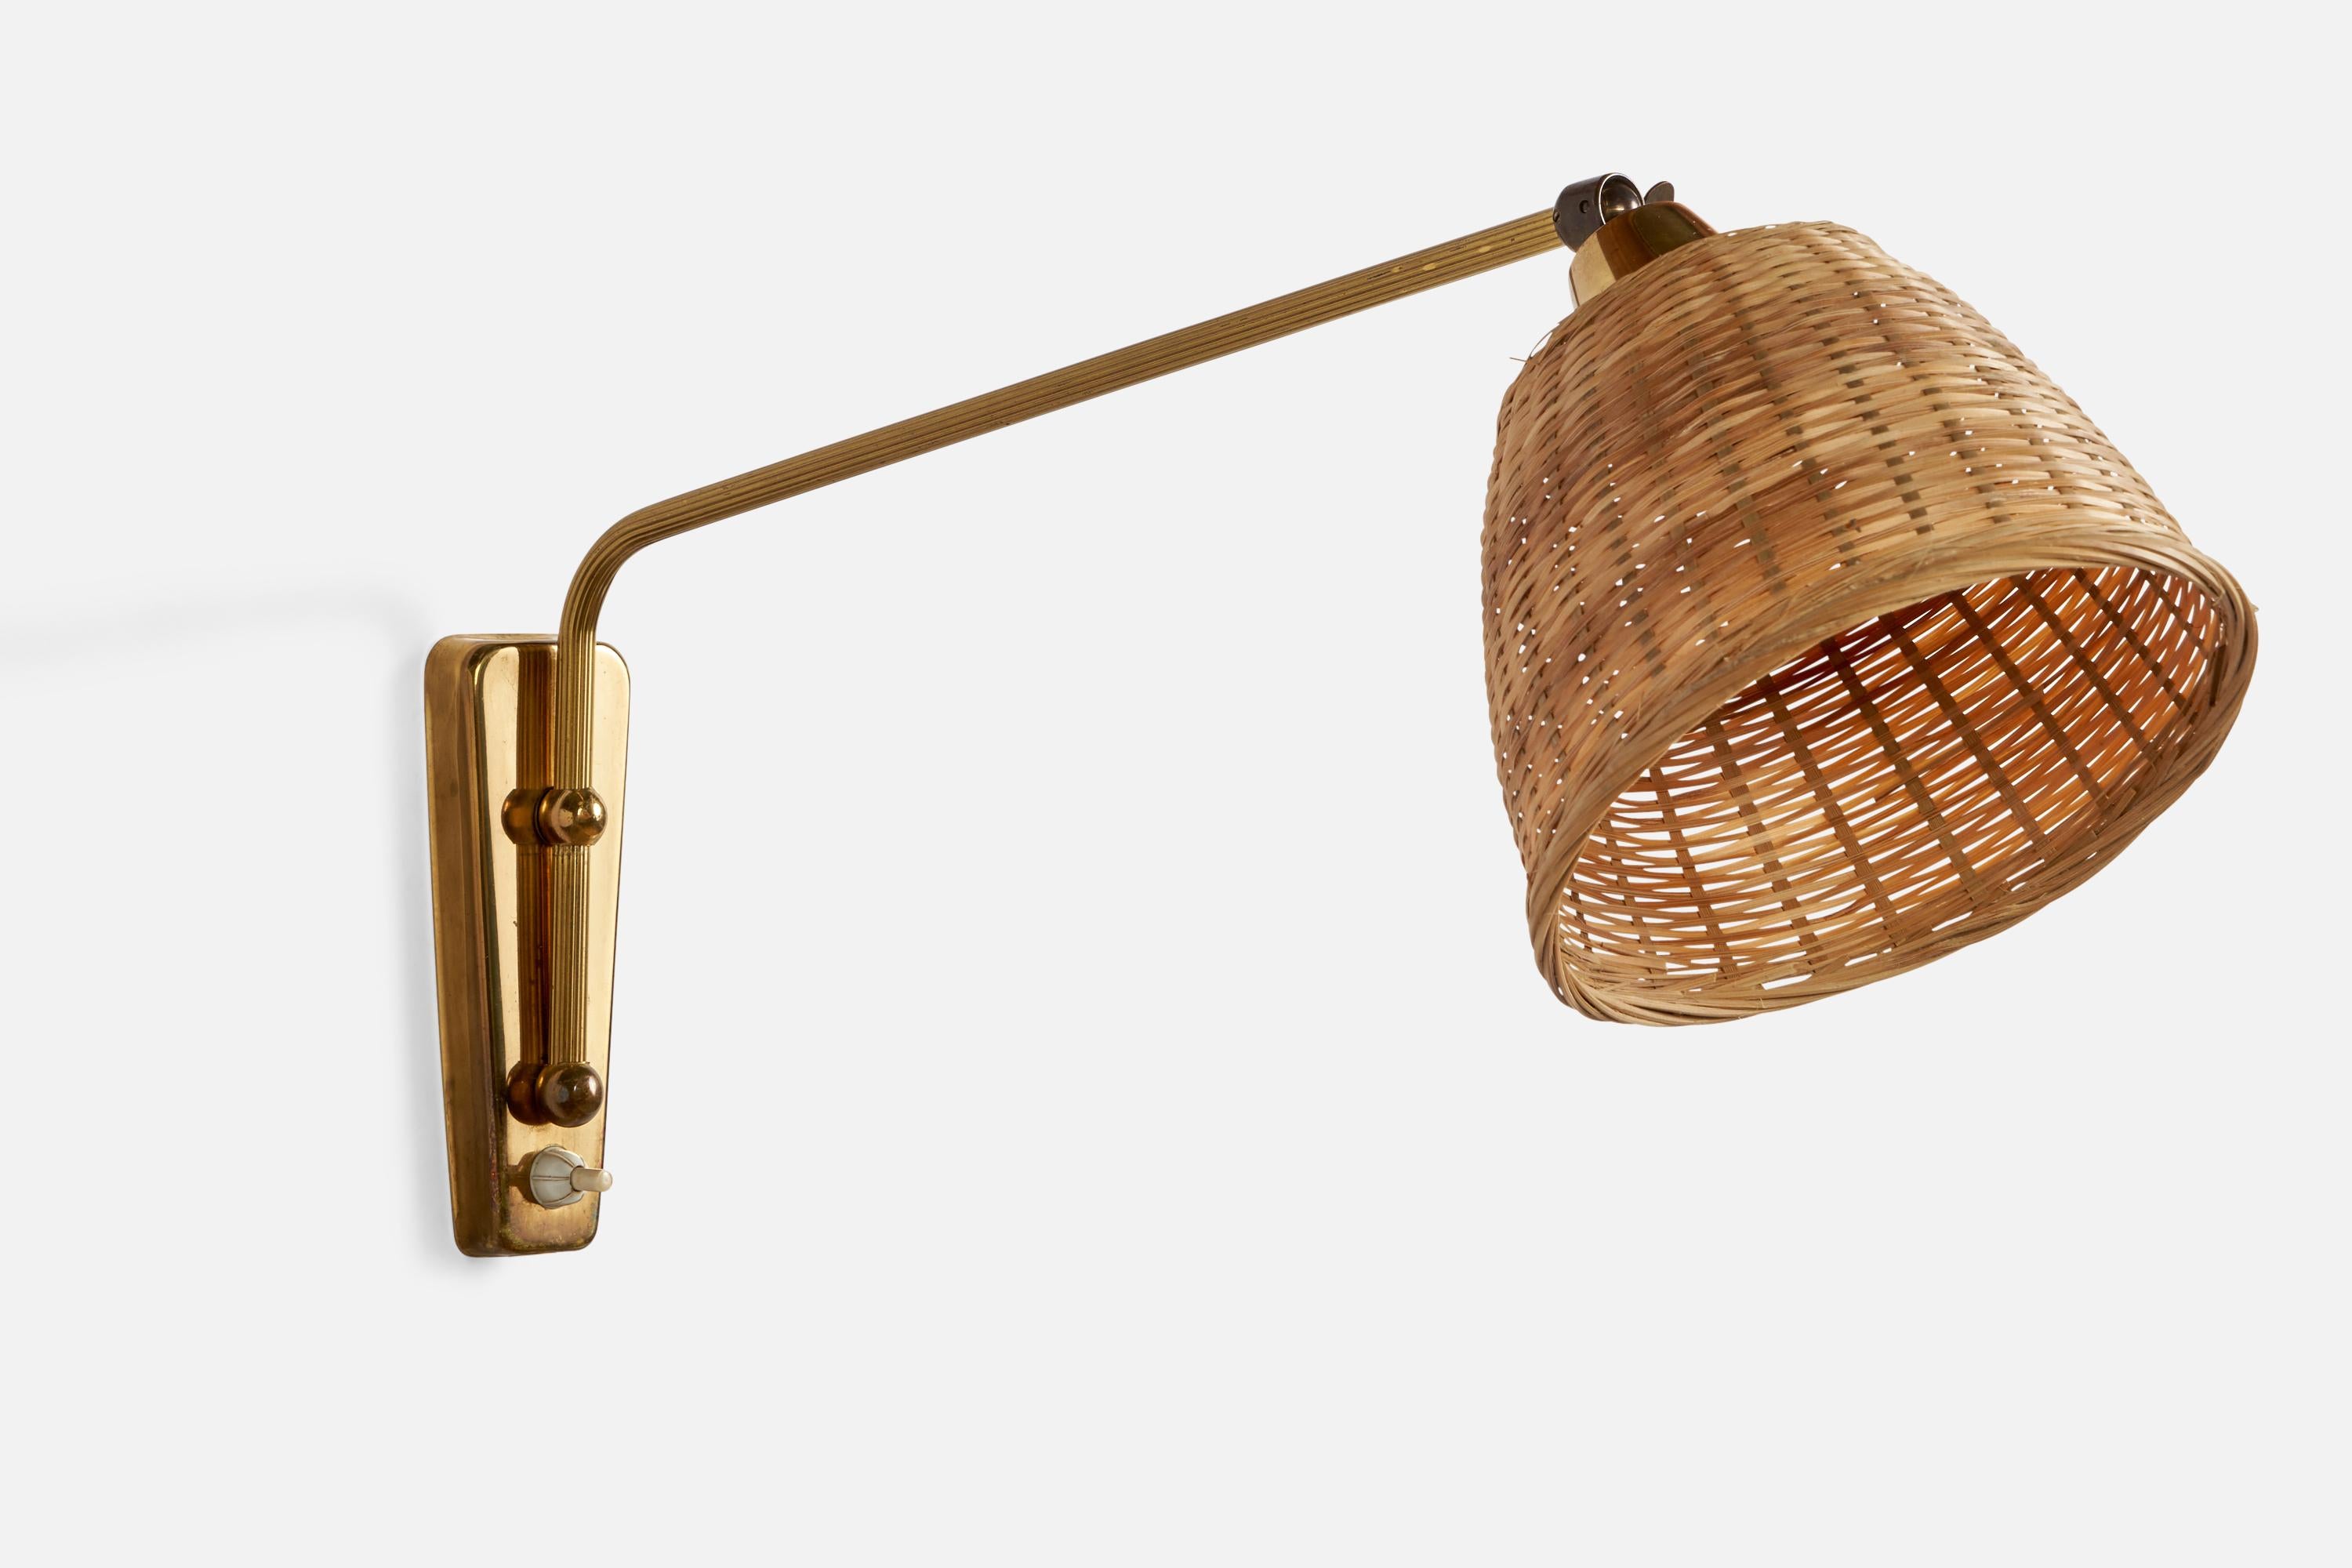 An adjustable brass and rattan wall light designed and produced in Denmark, 1940s.

Overall Dimensions (inches): 9.5” H x 6.5” W x 19.5” D
Back Plate Dimensions (inches): 6” H x 2.25” W x 0.65” D
Bulb Specifications: E-26 Bulb
Number of Sockets: